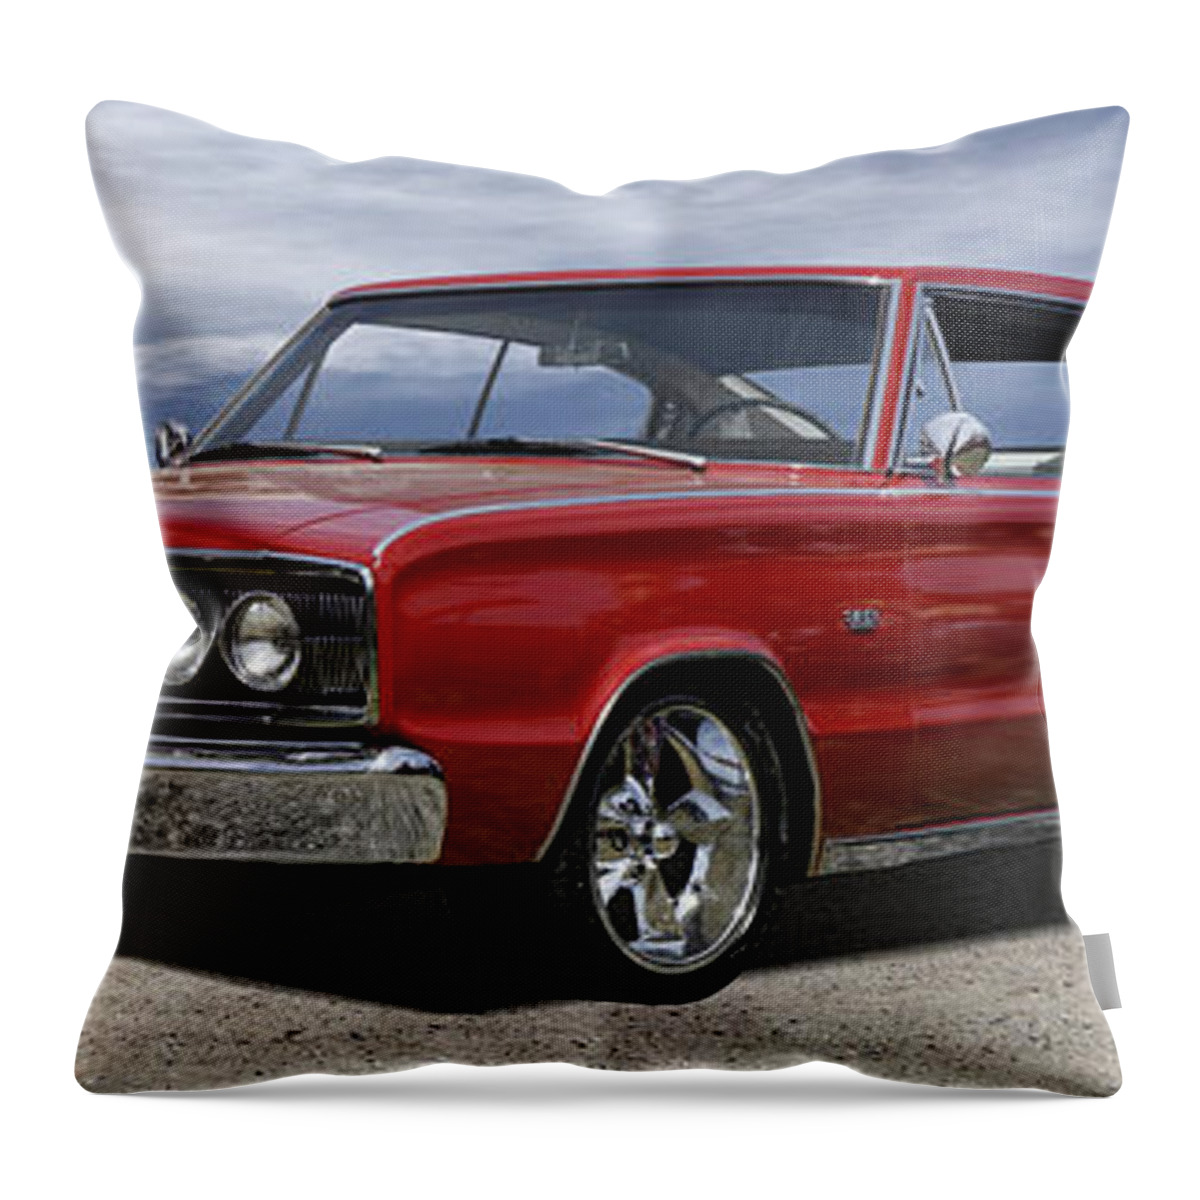 1966 Dodge Charger Throw Pillow featuring the photograph 1966 Dodge Charger by Mike McGlothlen